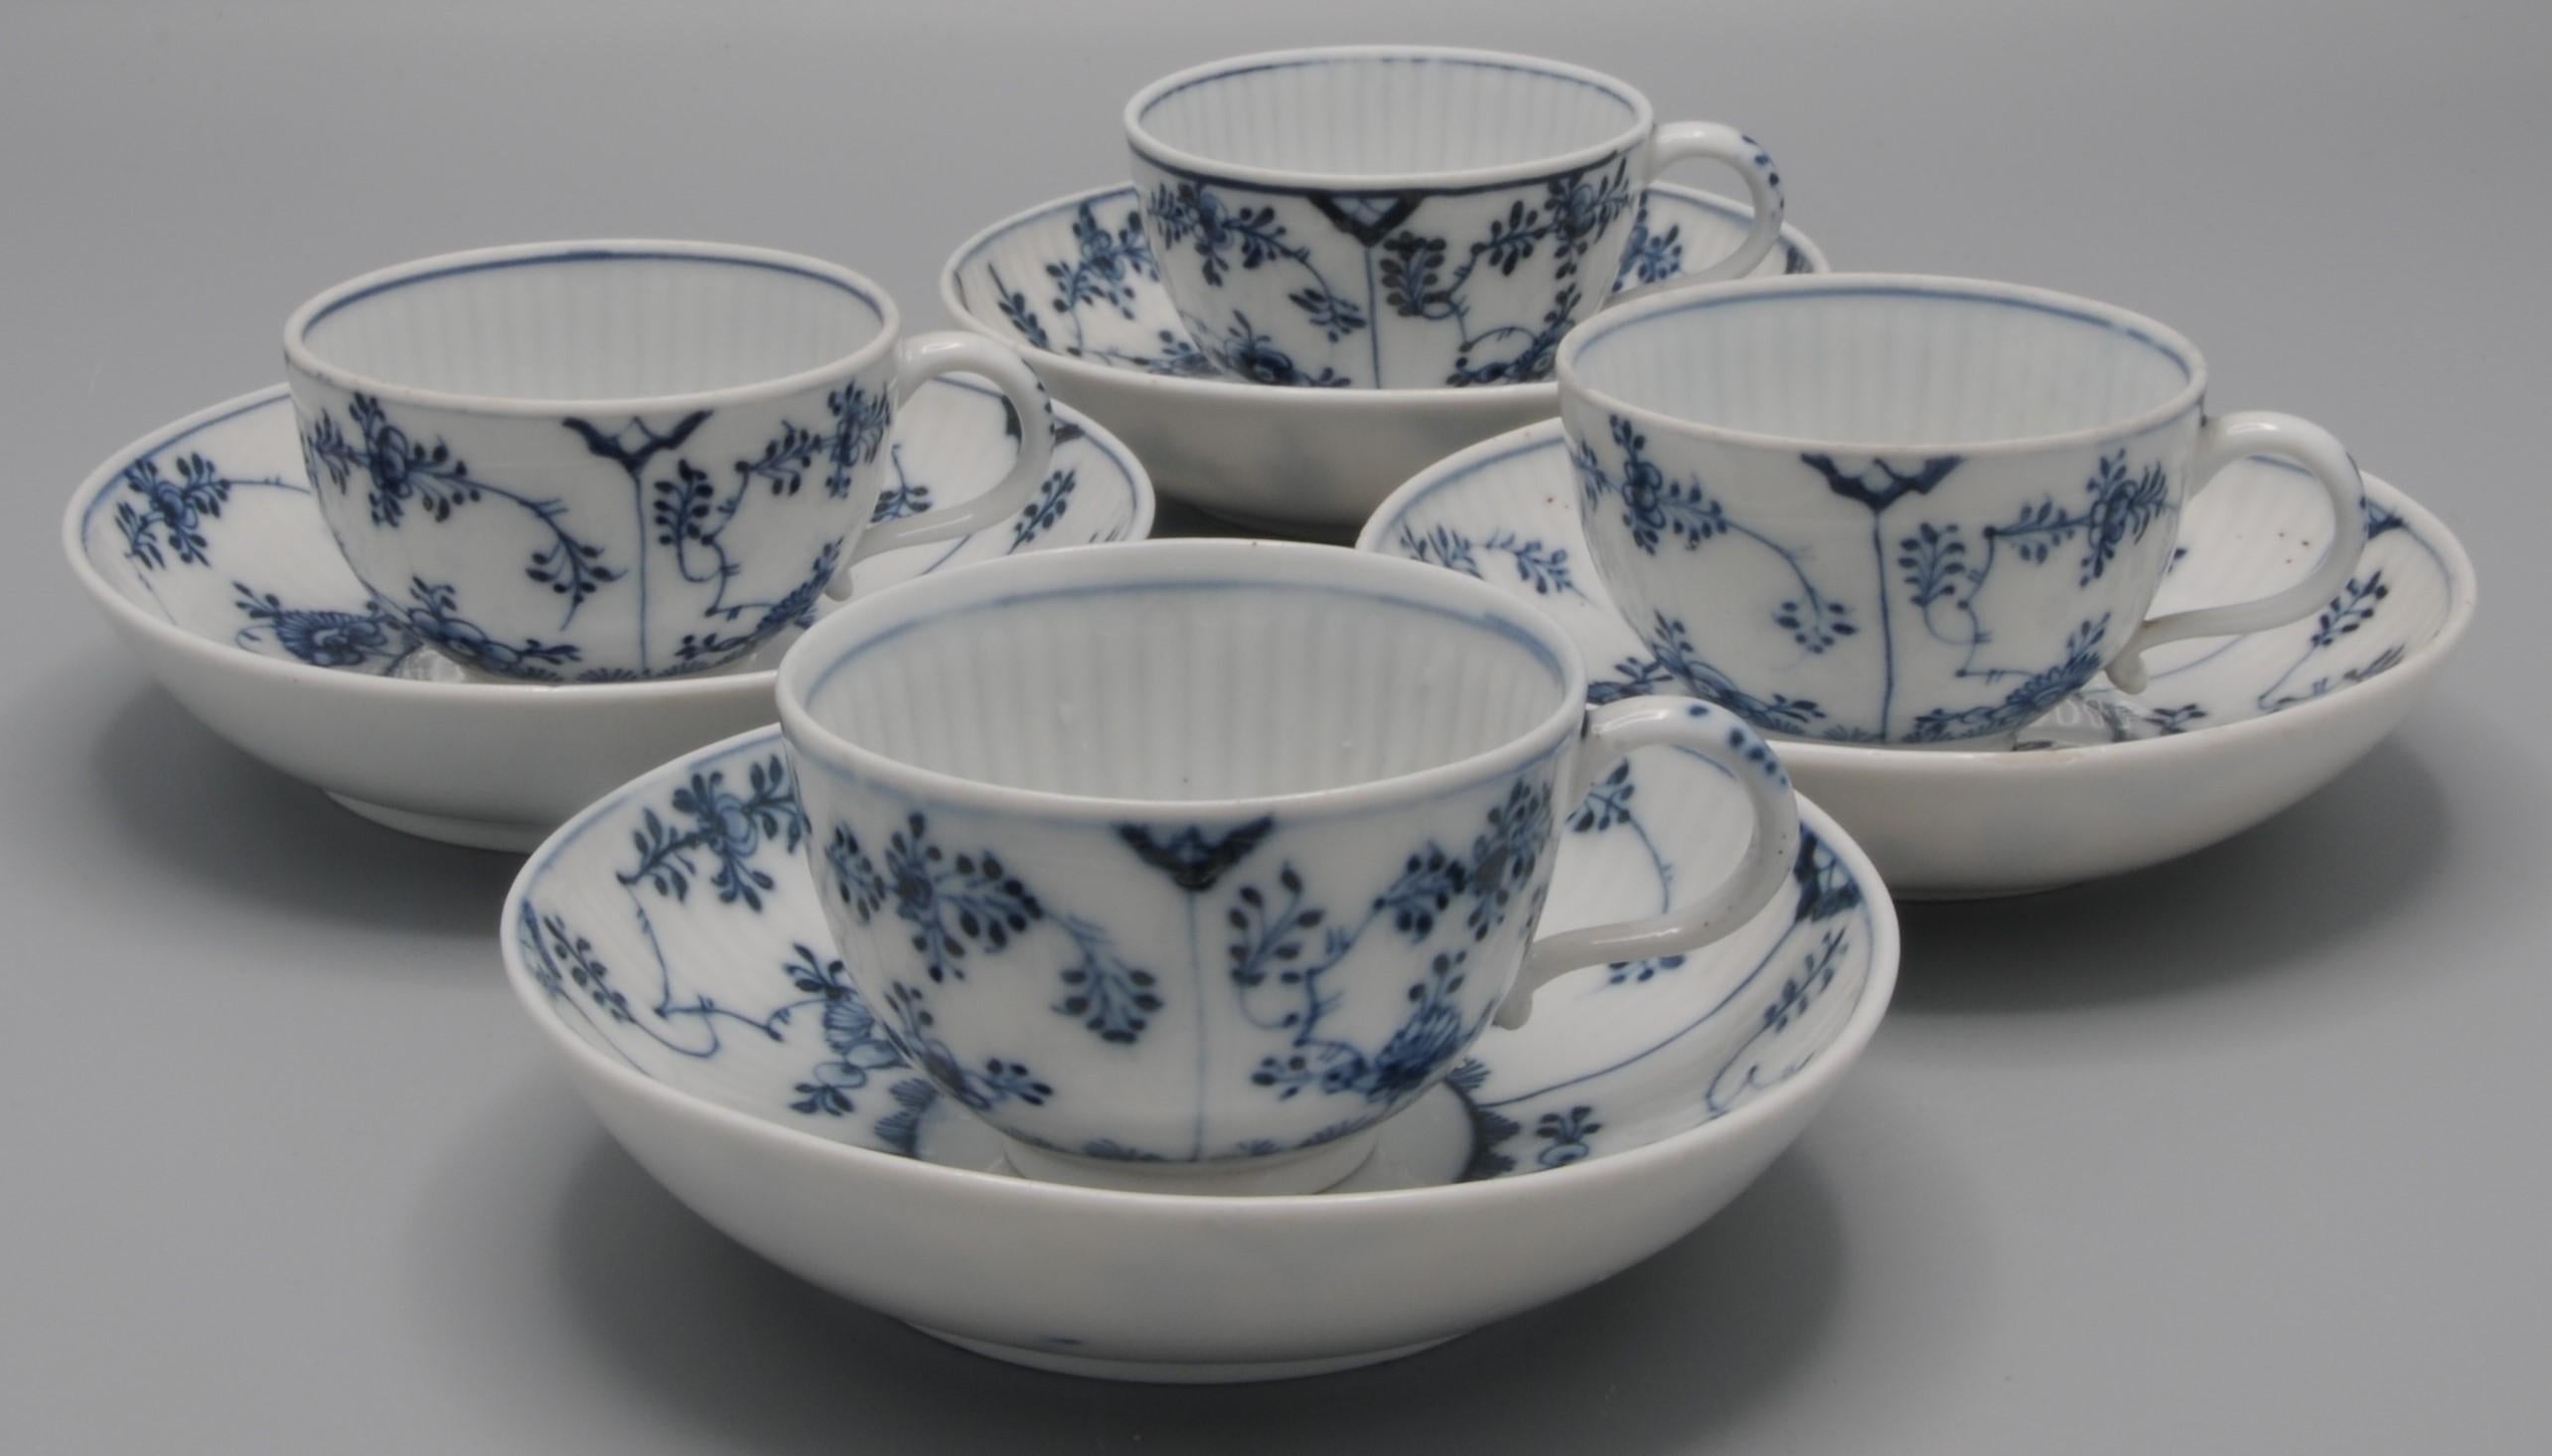 Hand-Painted Meissen - 4 cups and saucers 'Strohblumenmuster', Marcolini period 1774-1814 For Sale